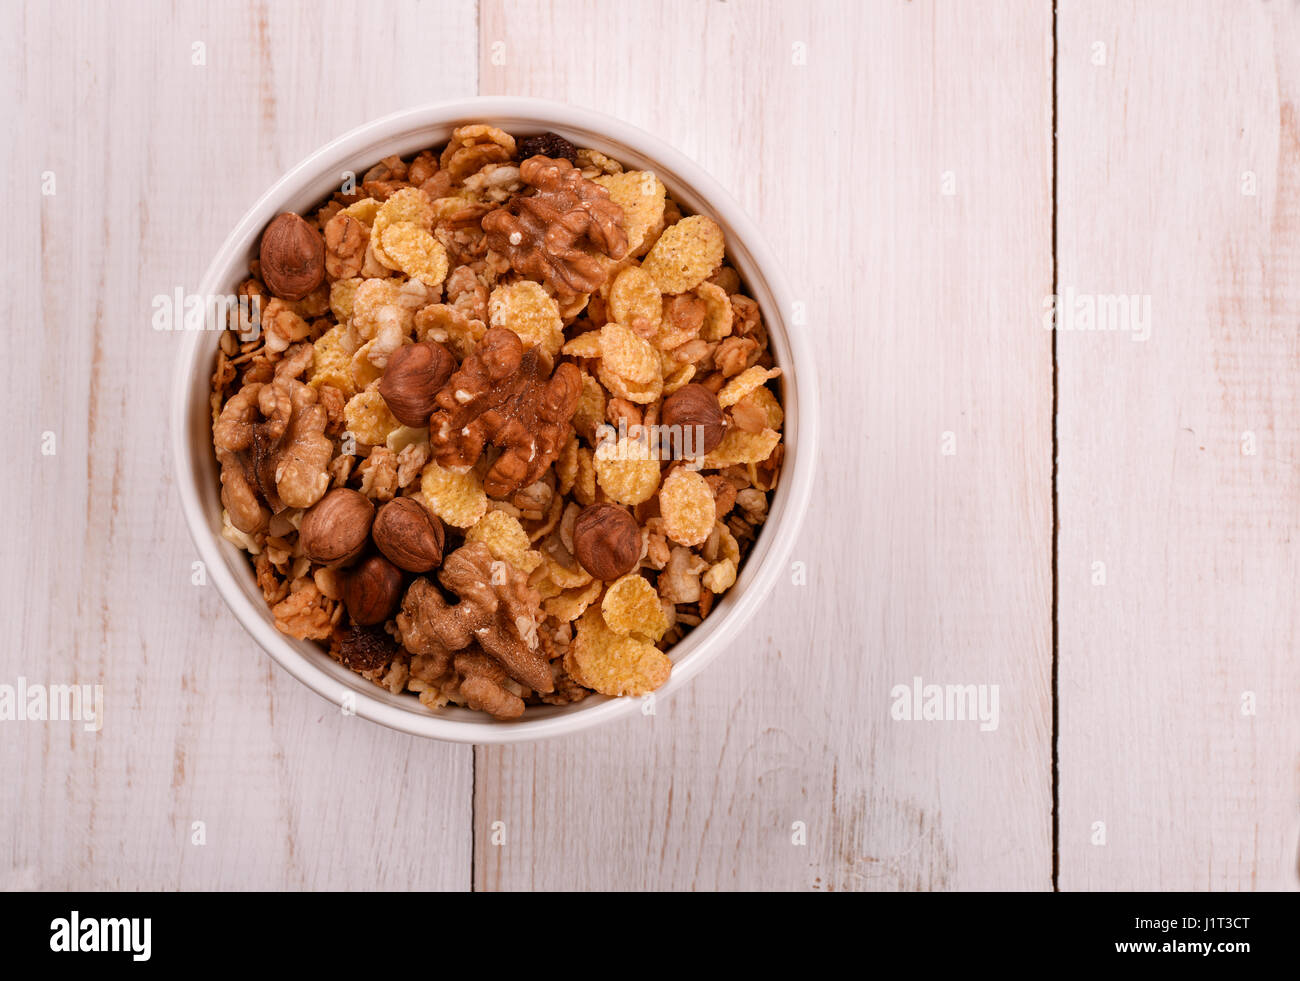 Top view of corn flakes and nuts in bowl on wood table Stock Photo